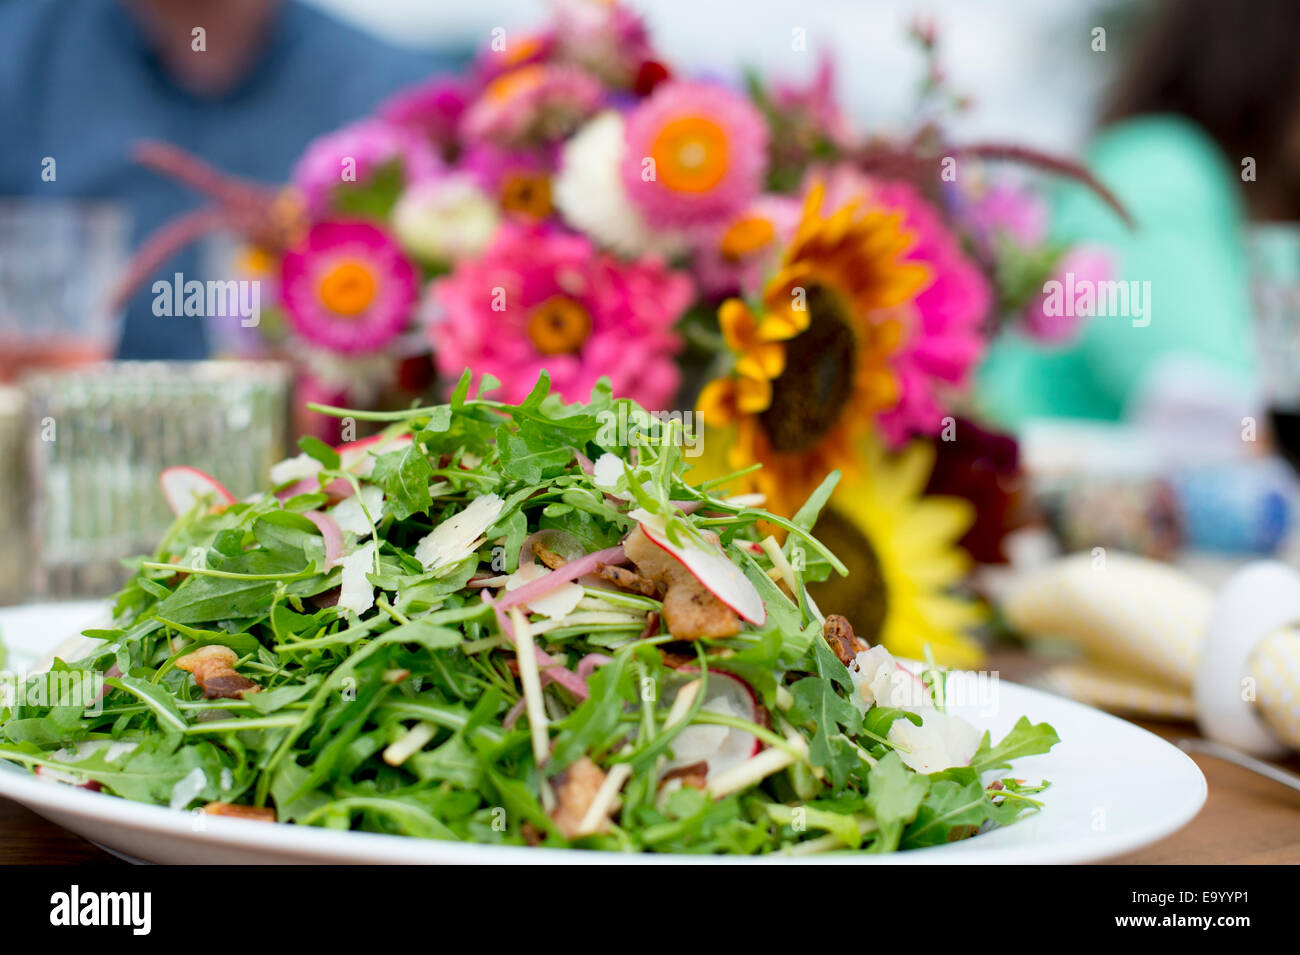 Fresh salad on serving plate, ready to be served Stock Photo